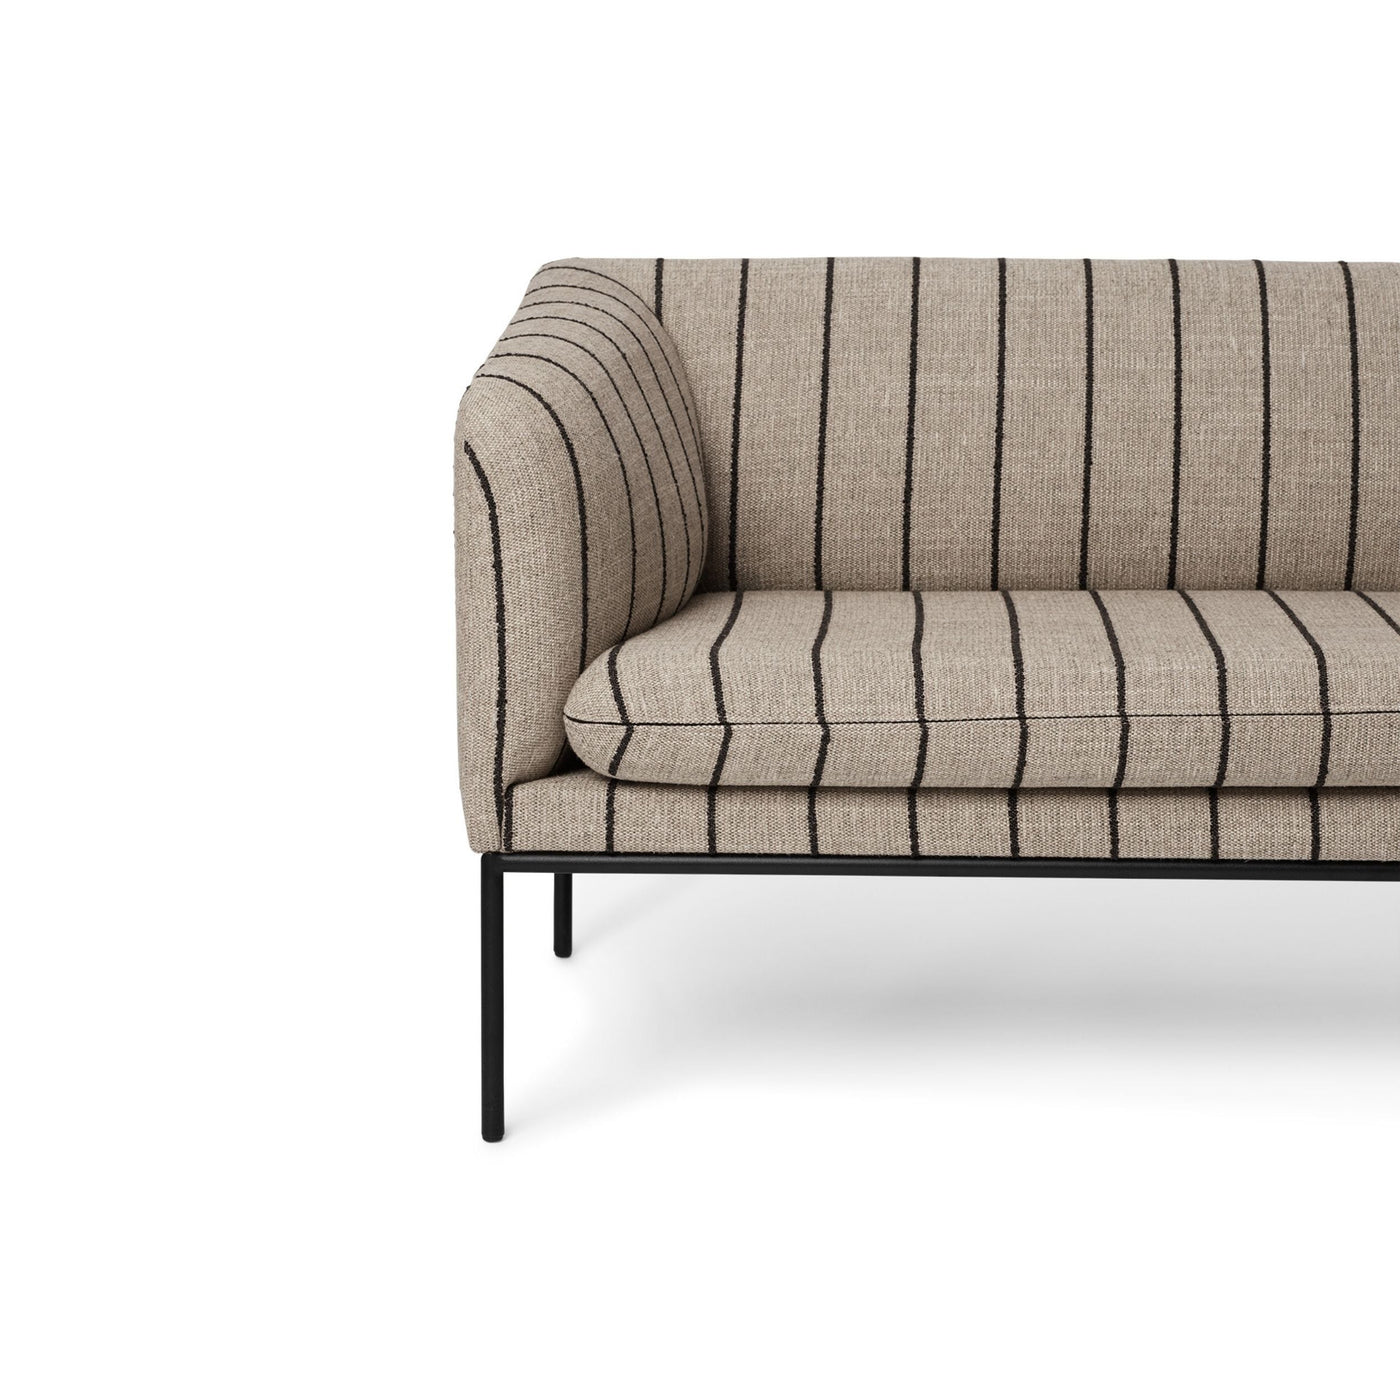 Ferm Living Turn sofa in Pasadena striped fabric. Made to order from someday designs